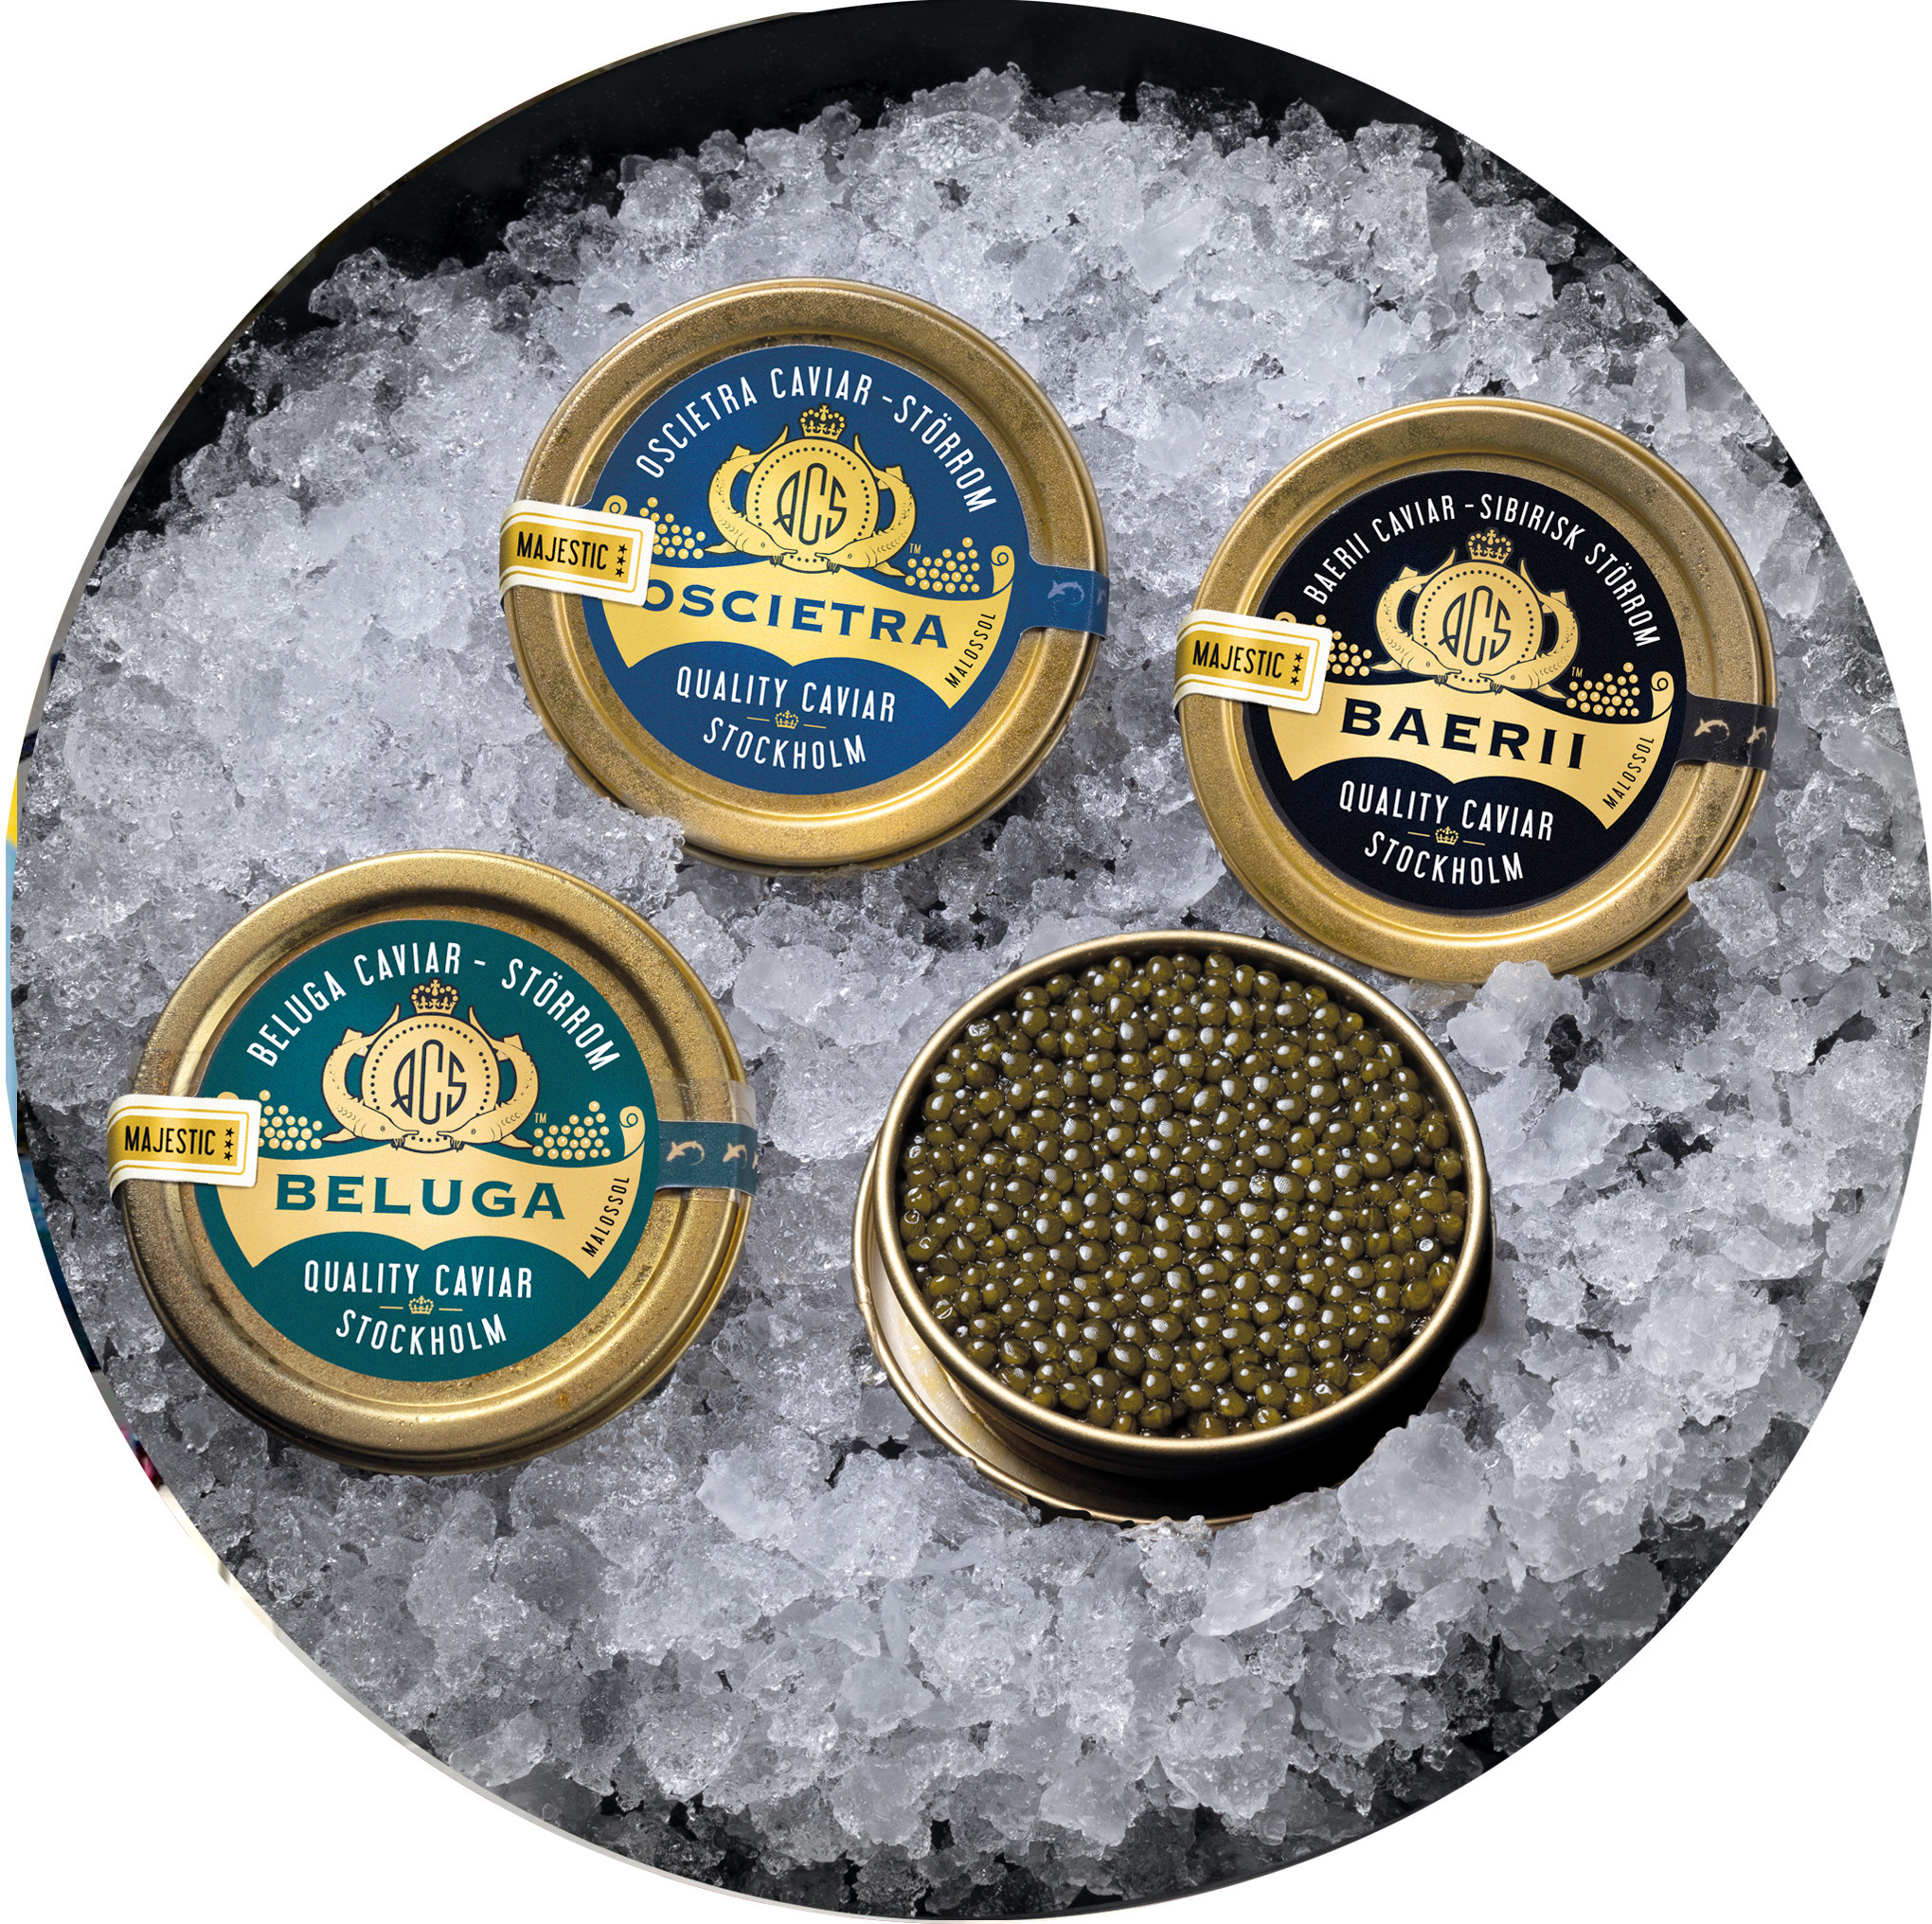 NOMINATED FOR IDENTITY PACKAGING - FOOD - QUALITY CAVIAR STOCKHOLM